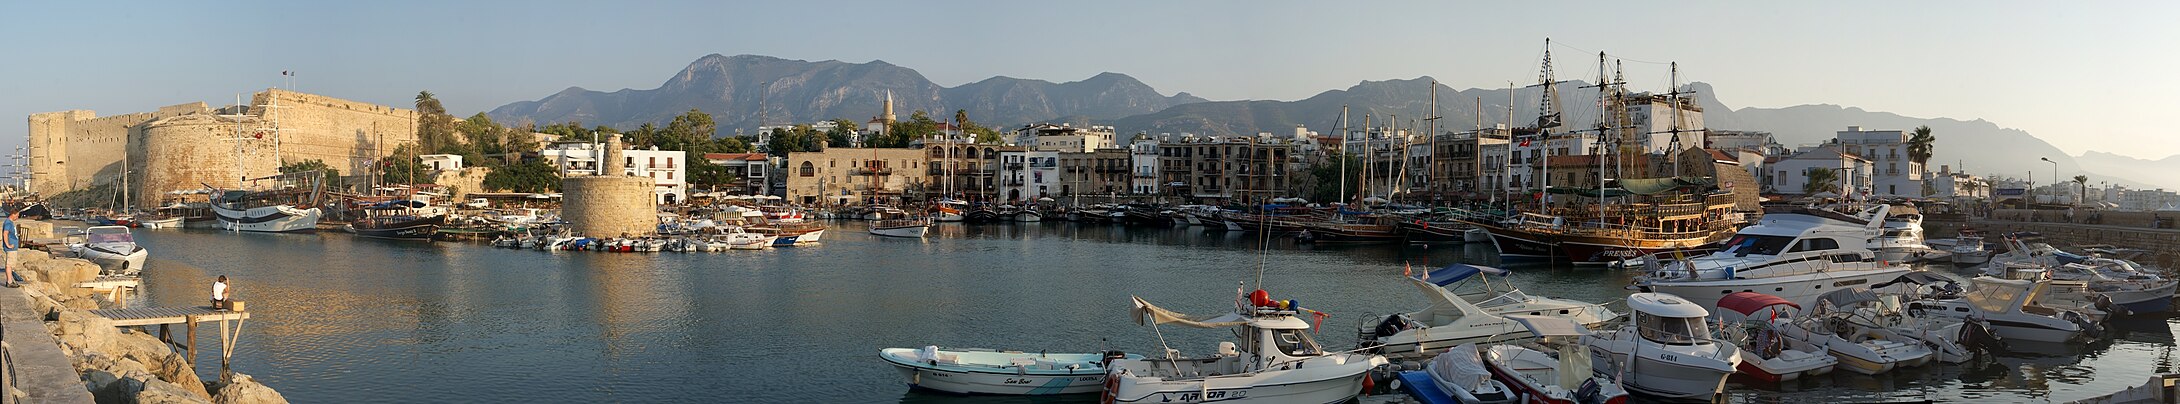 Panoramic view of the Kyrenia Harbour, with the Venetian-era Kyrenia Castle on the far left, and the Kyrenia Mountains in the background